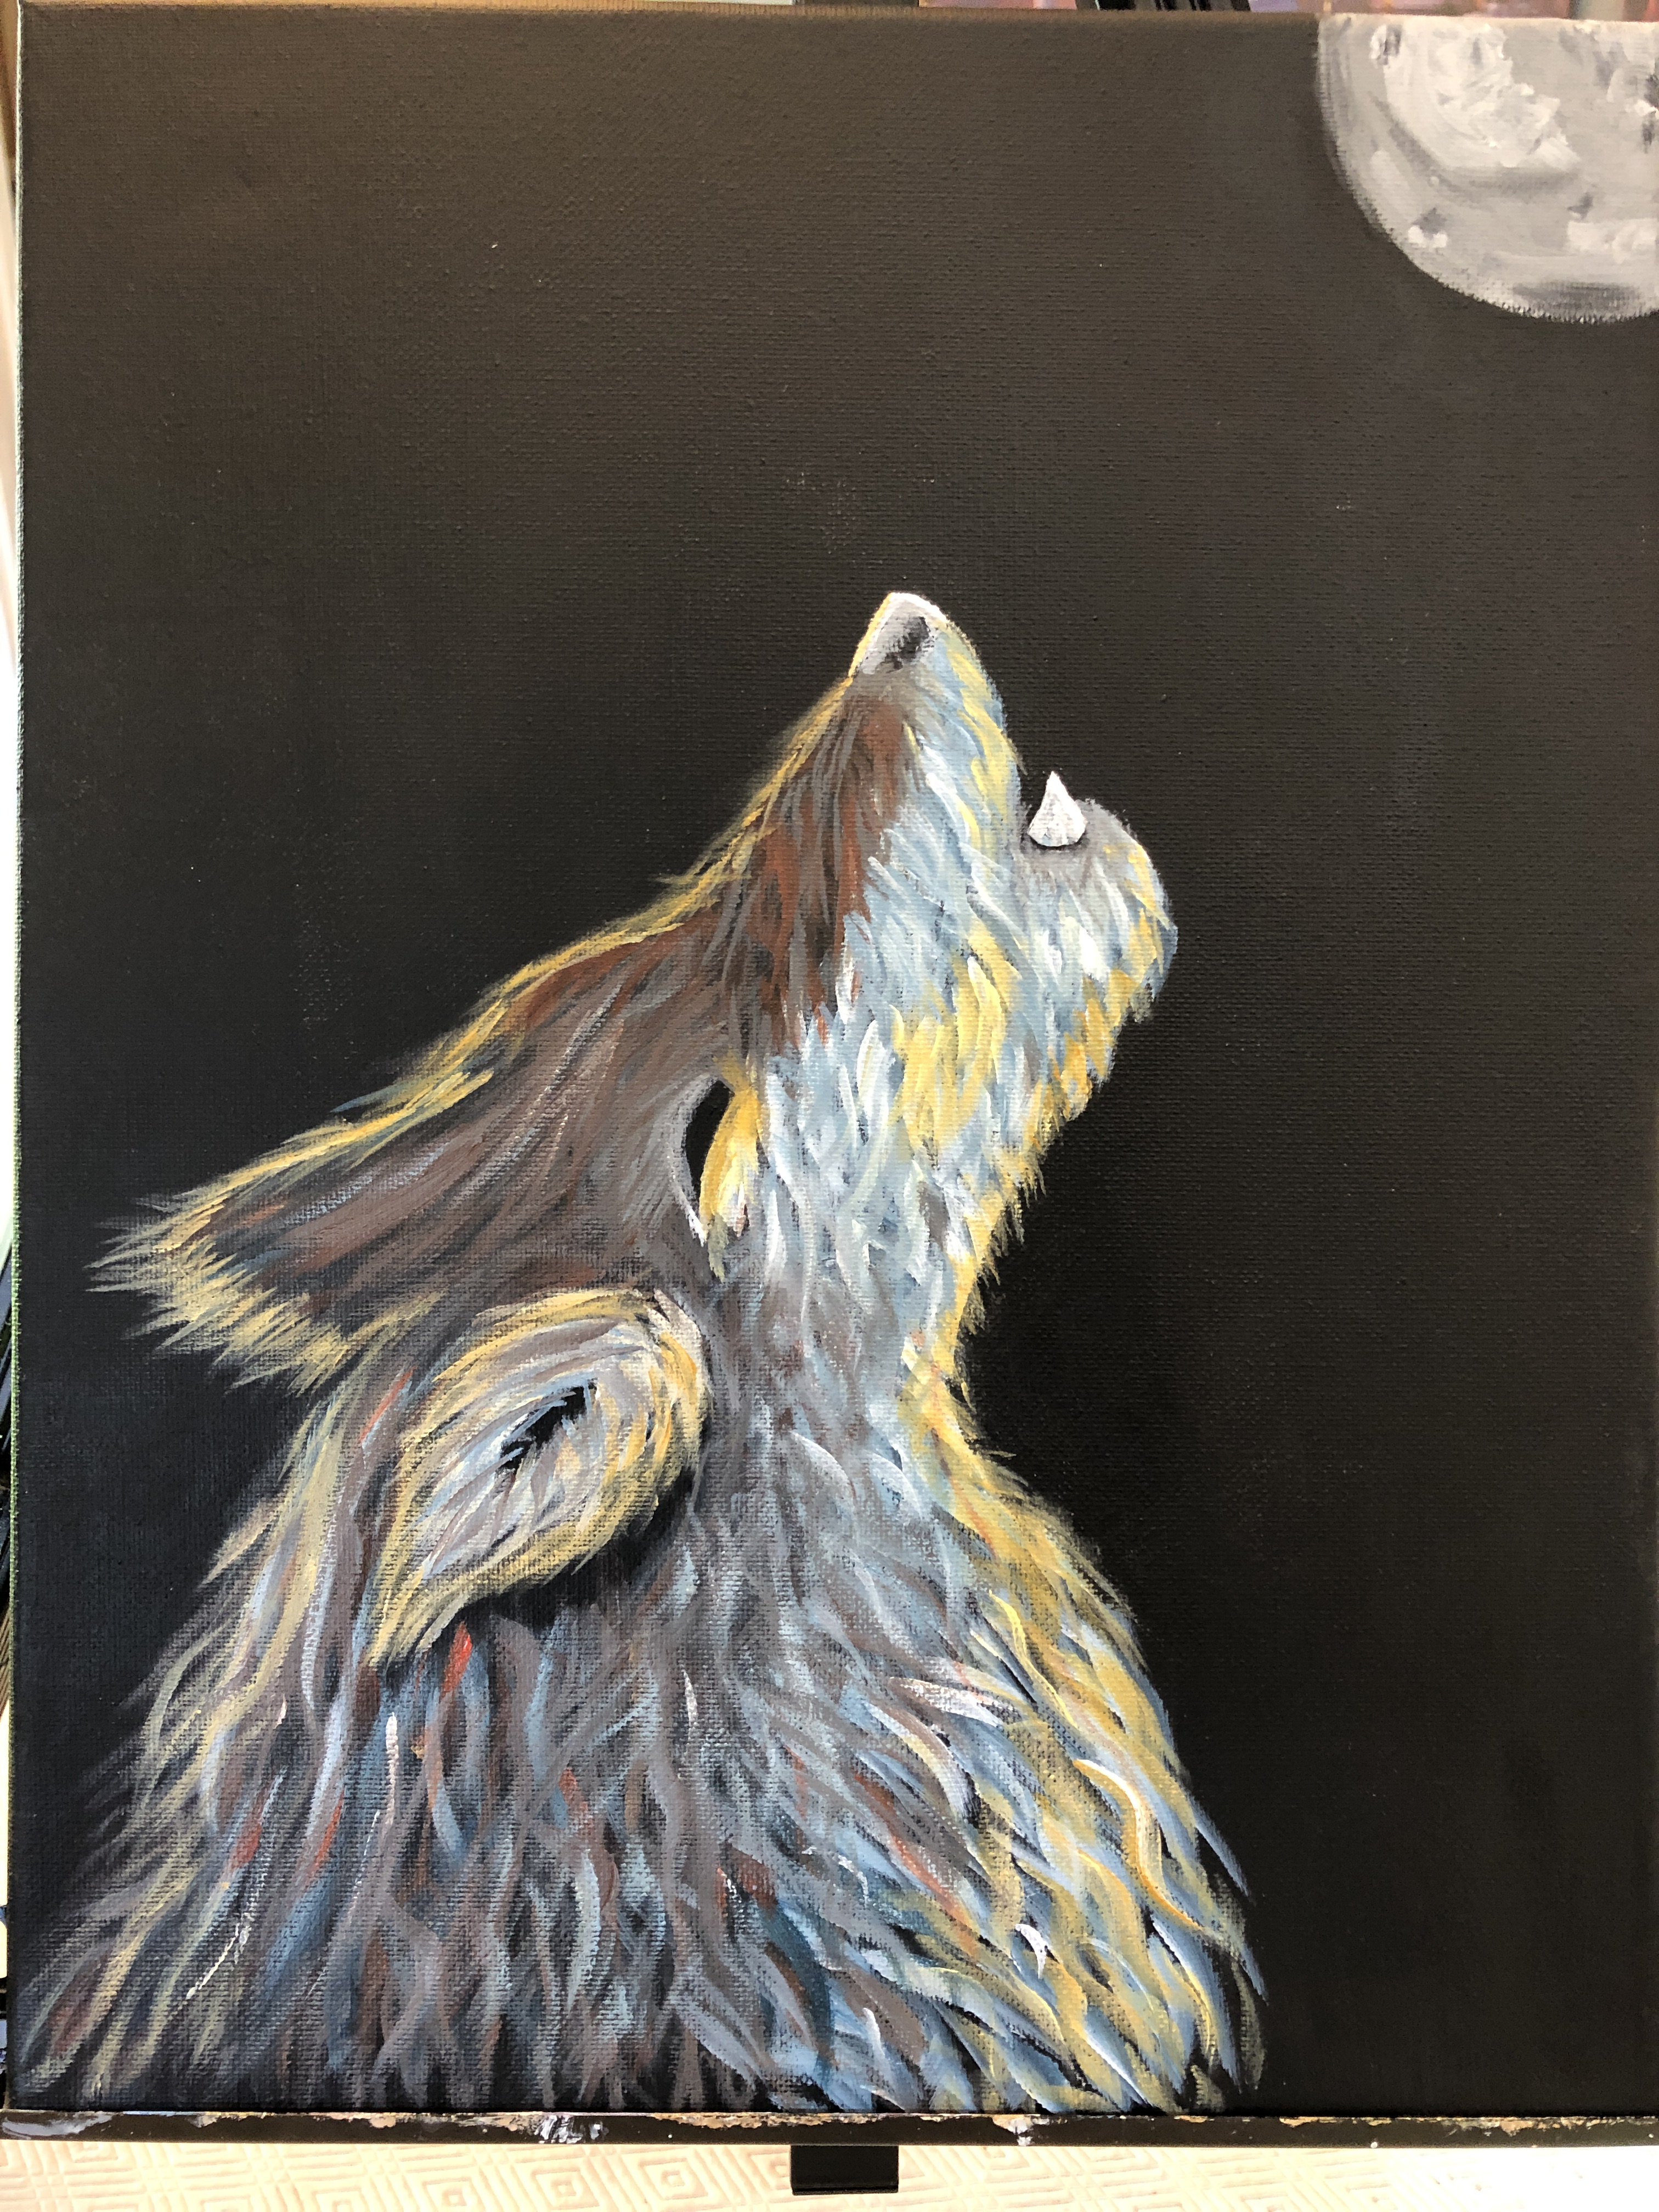 acrylic paintings of wolves